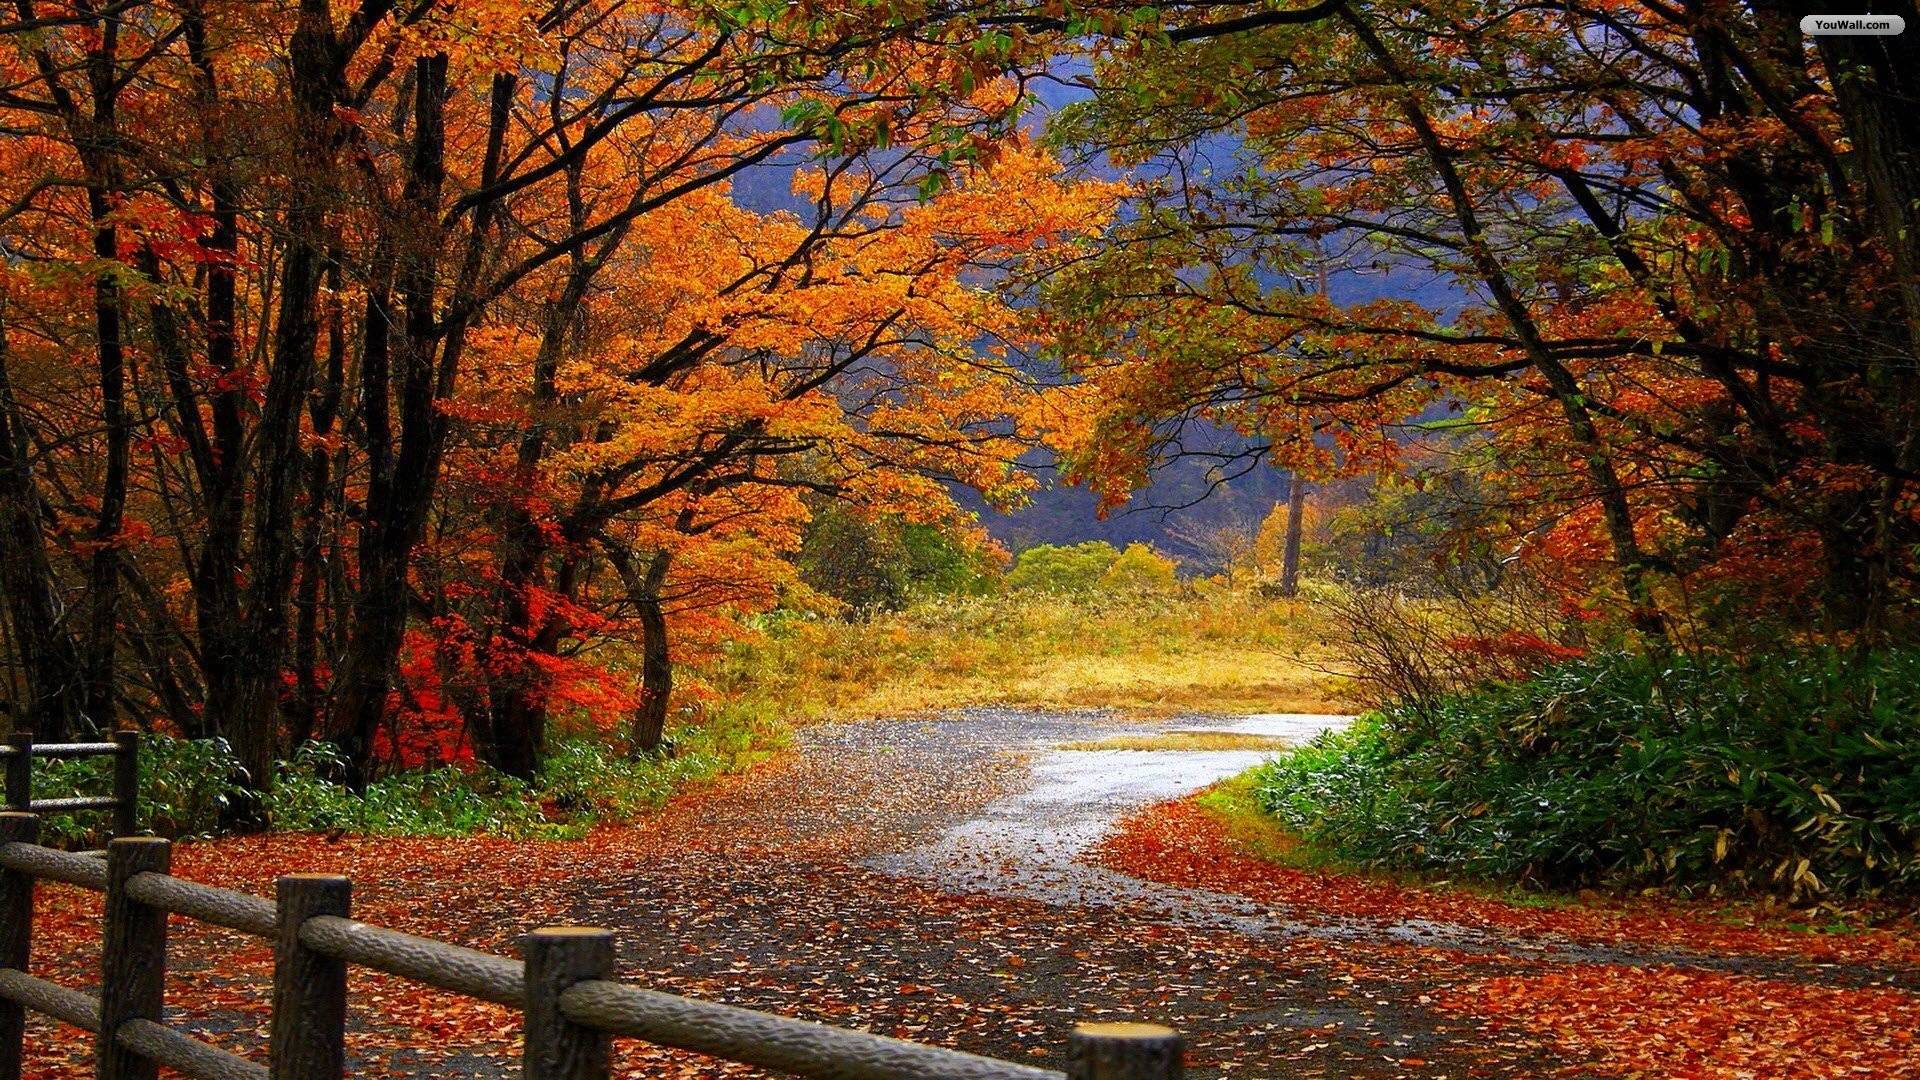 Fall Scenery Wallpapers - Wallpaper Cave